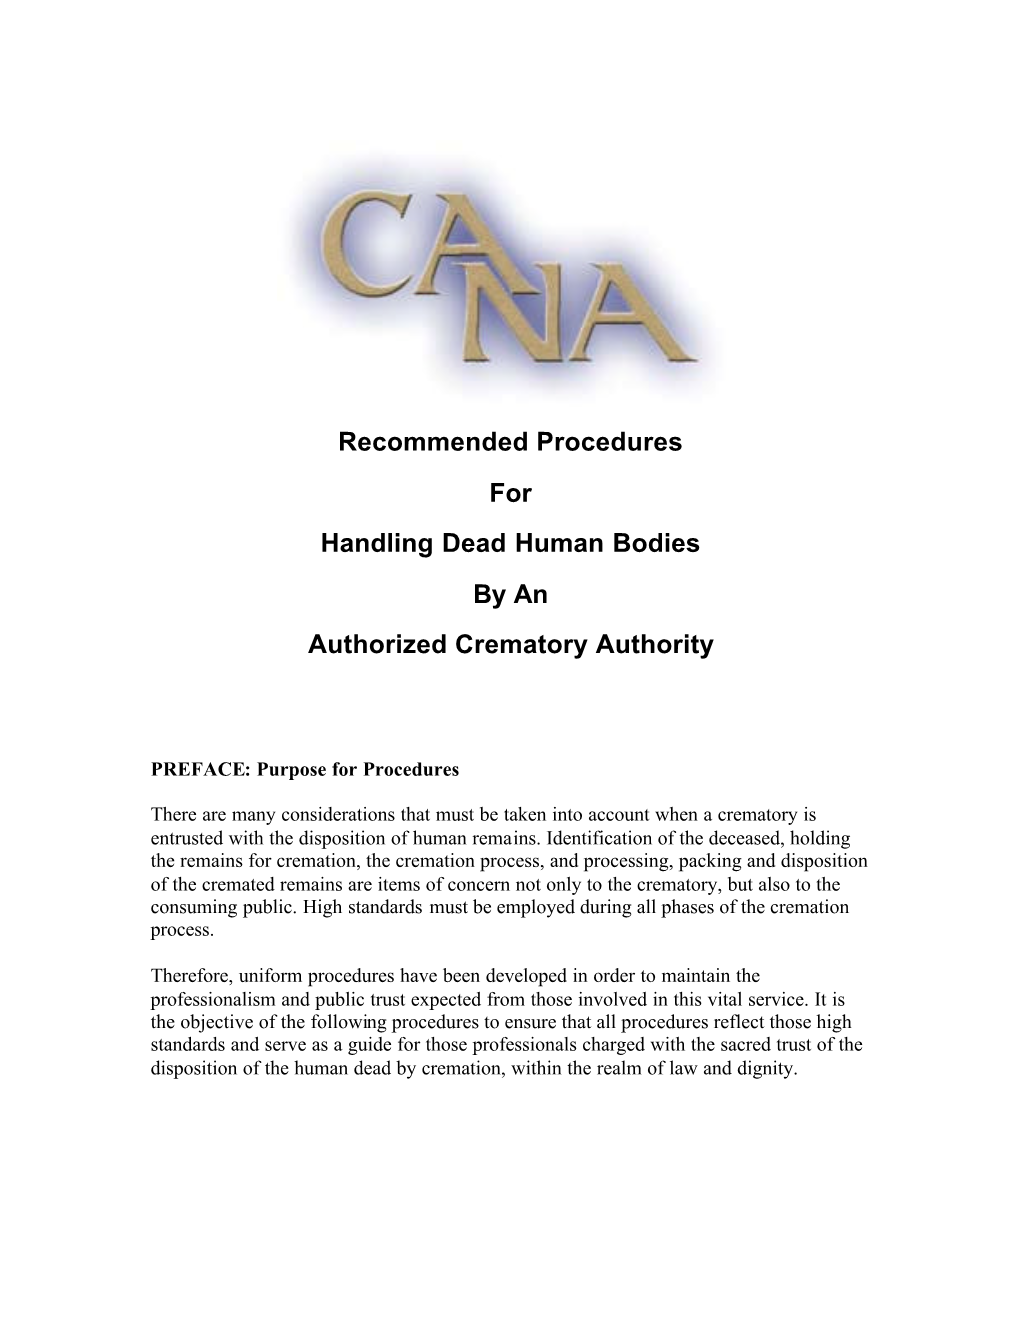 Recommended Procedures for Handling Human Remains